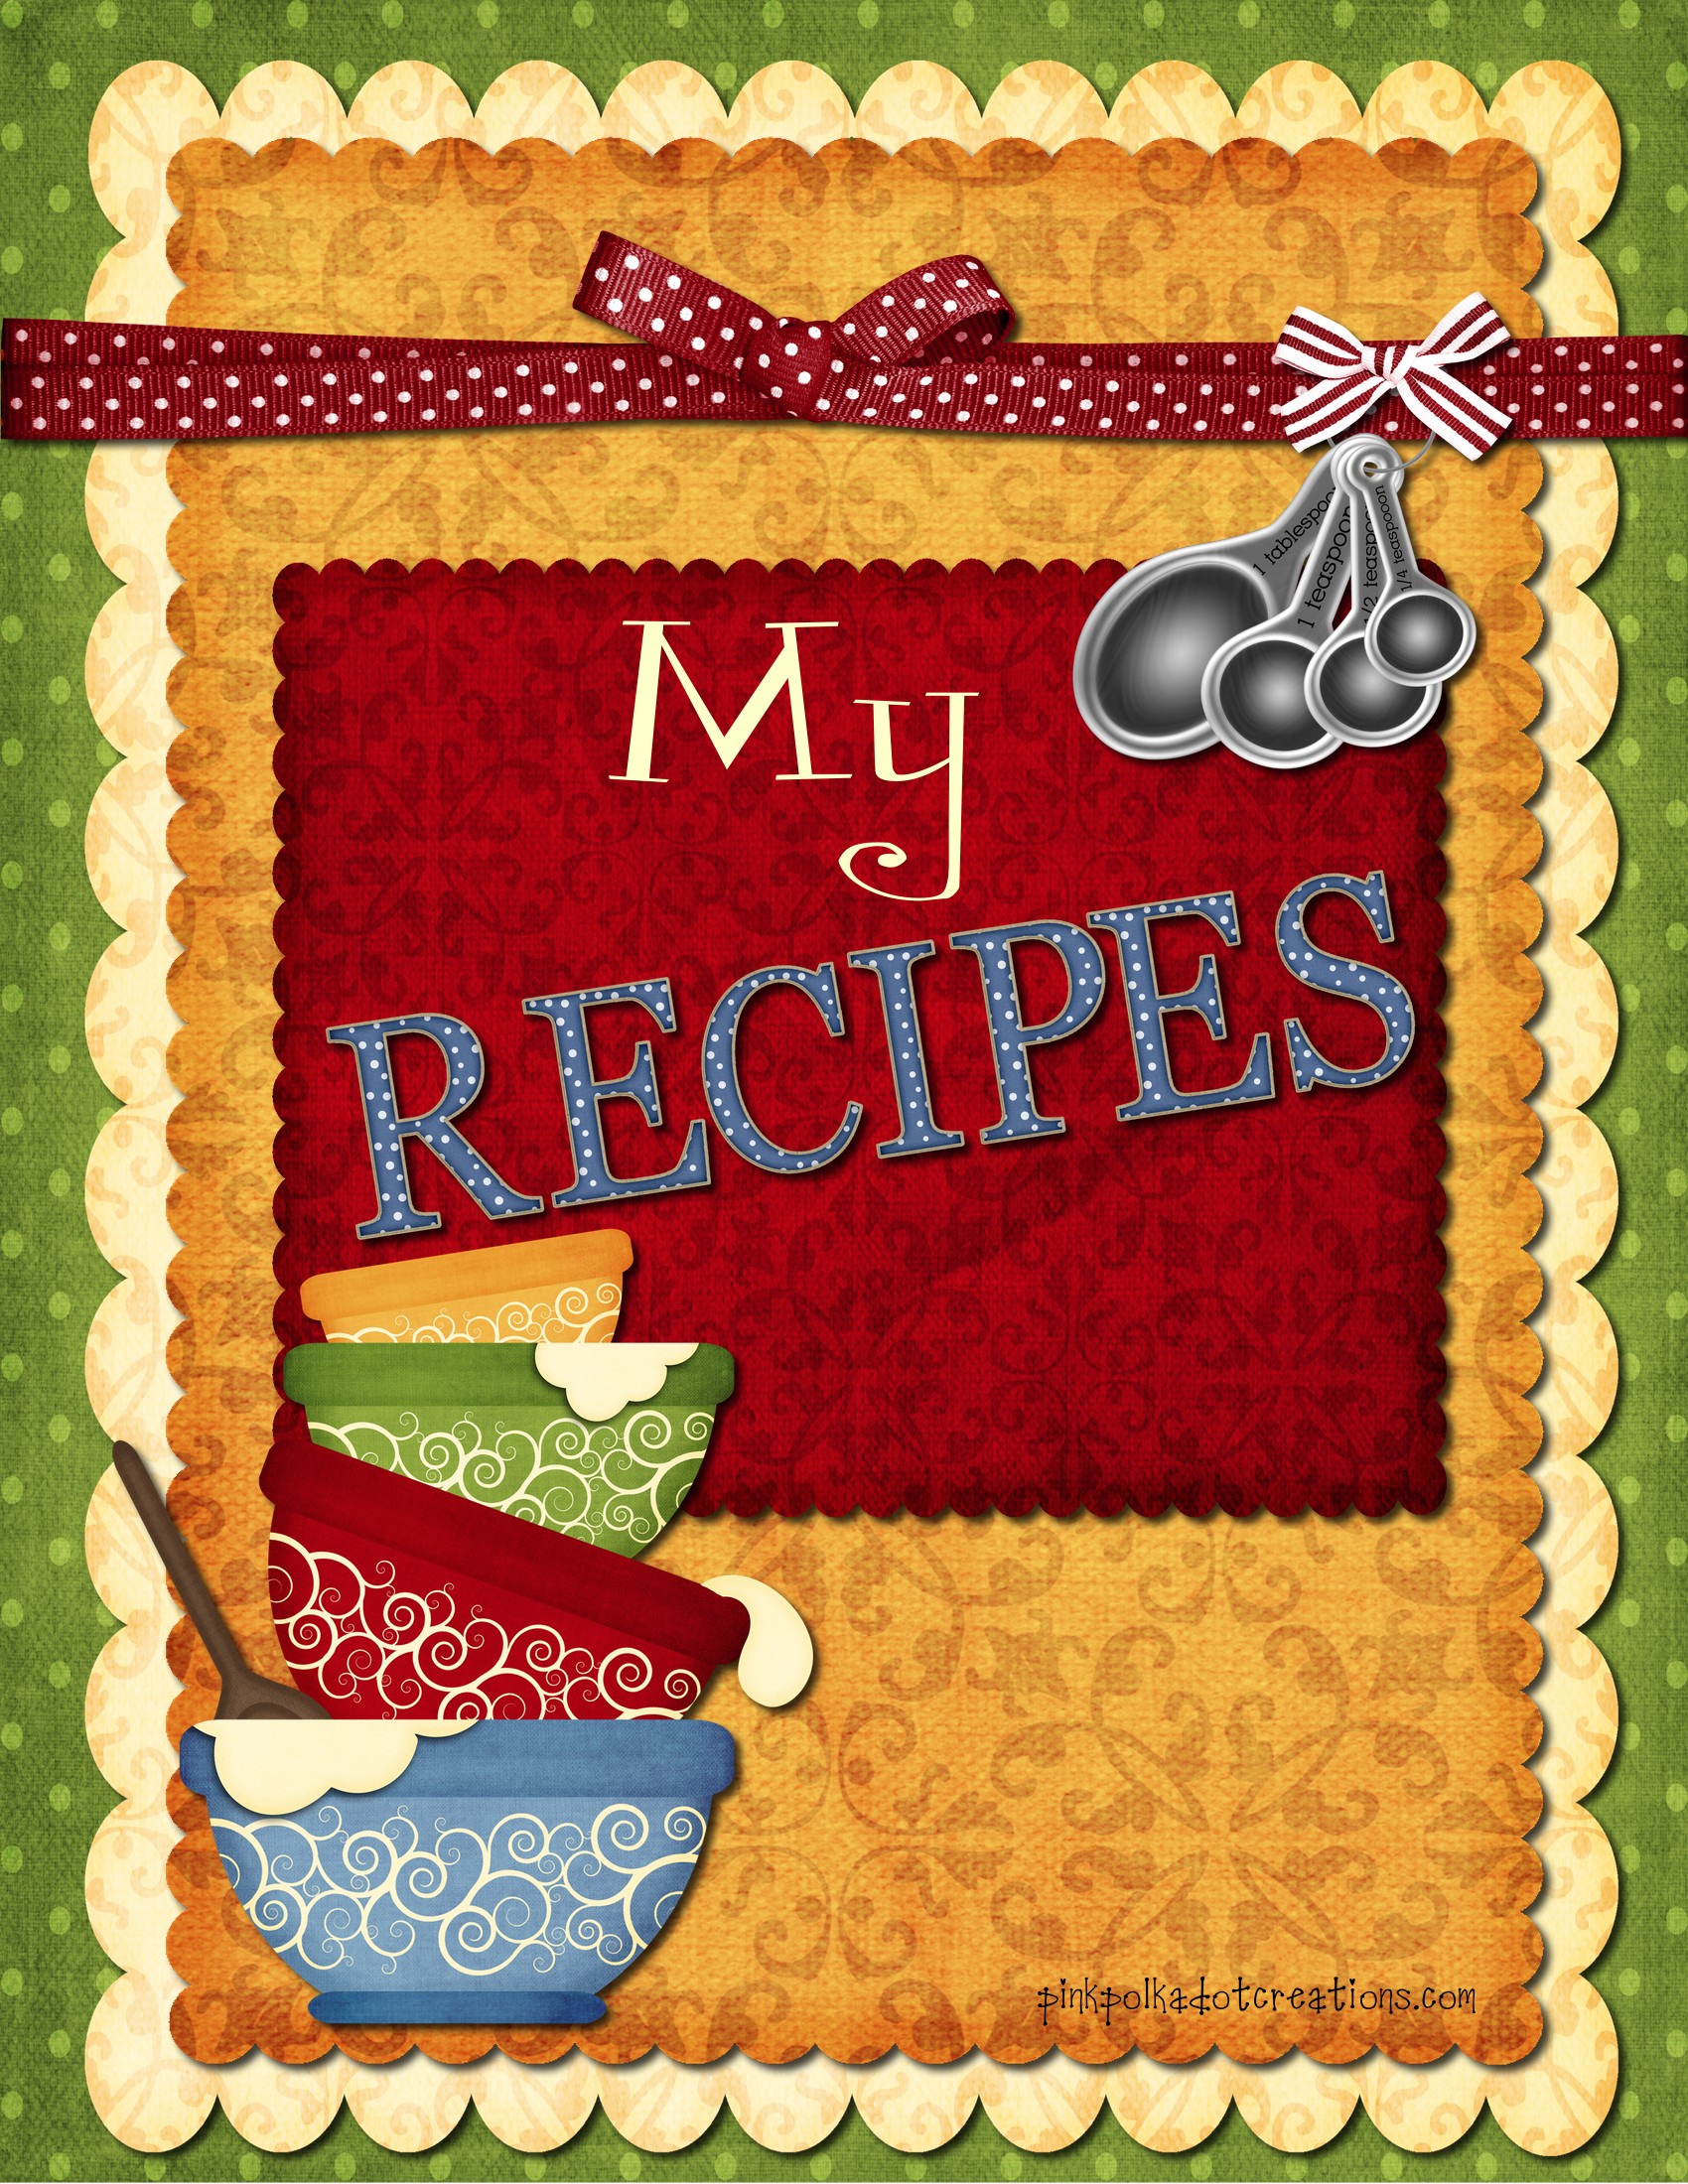 6 Best Images of Recipe Cookbook Cover Printables Printable Recipe